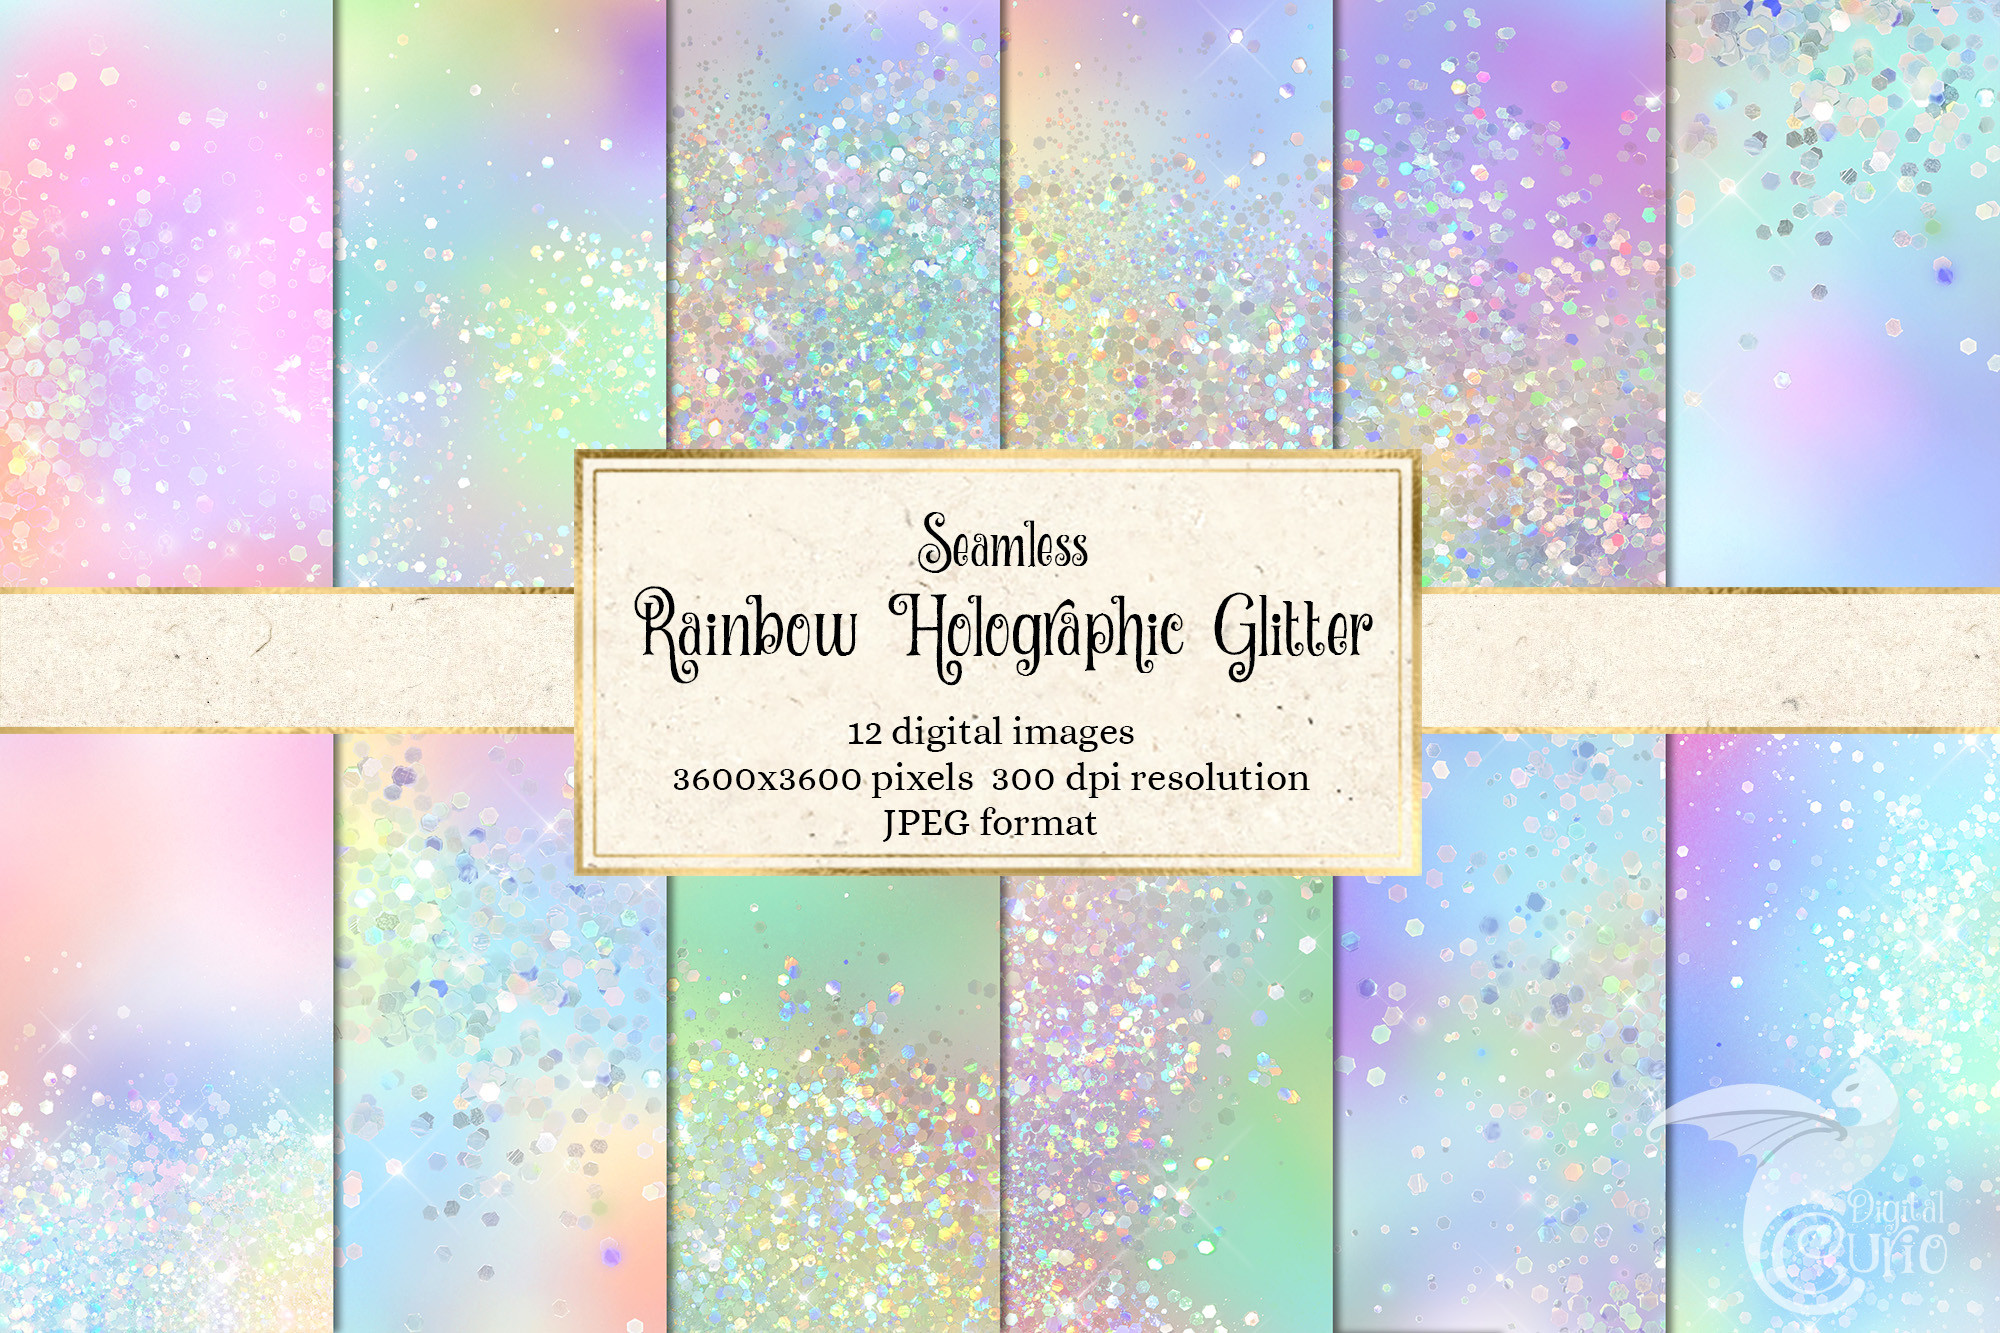 Seamless Rainbow Holographic Glitter Graphic by Digital Curio ...